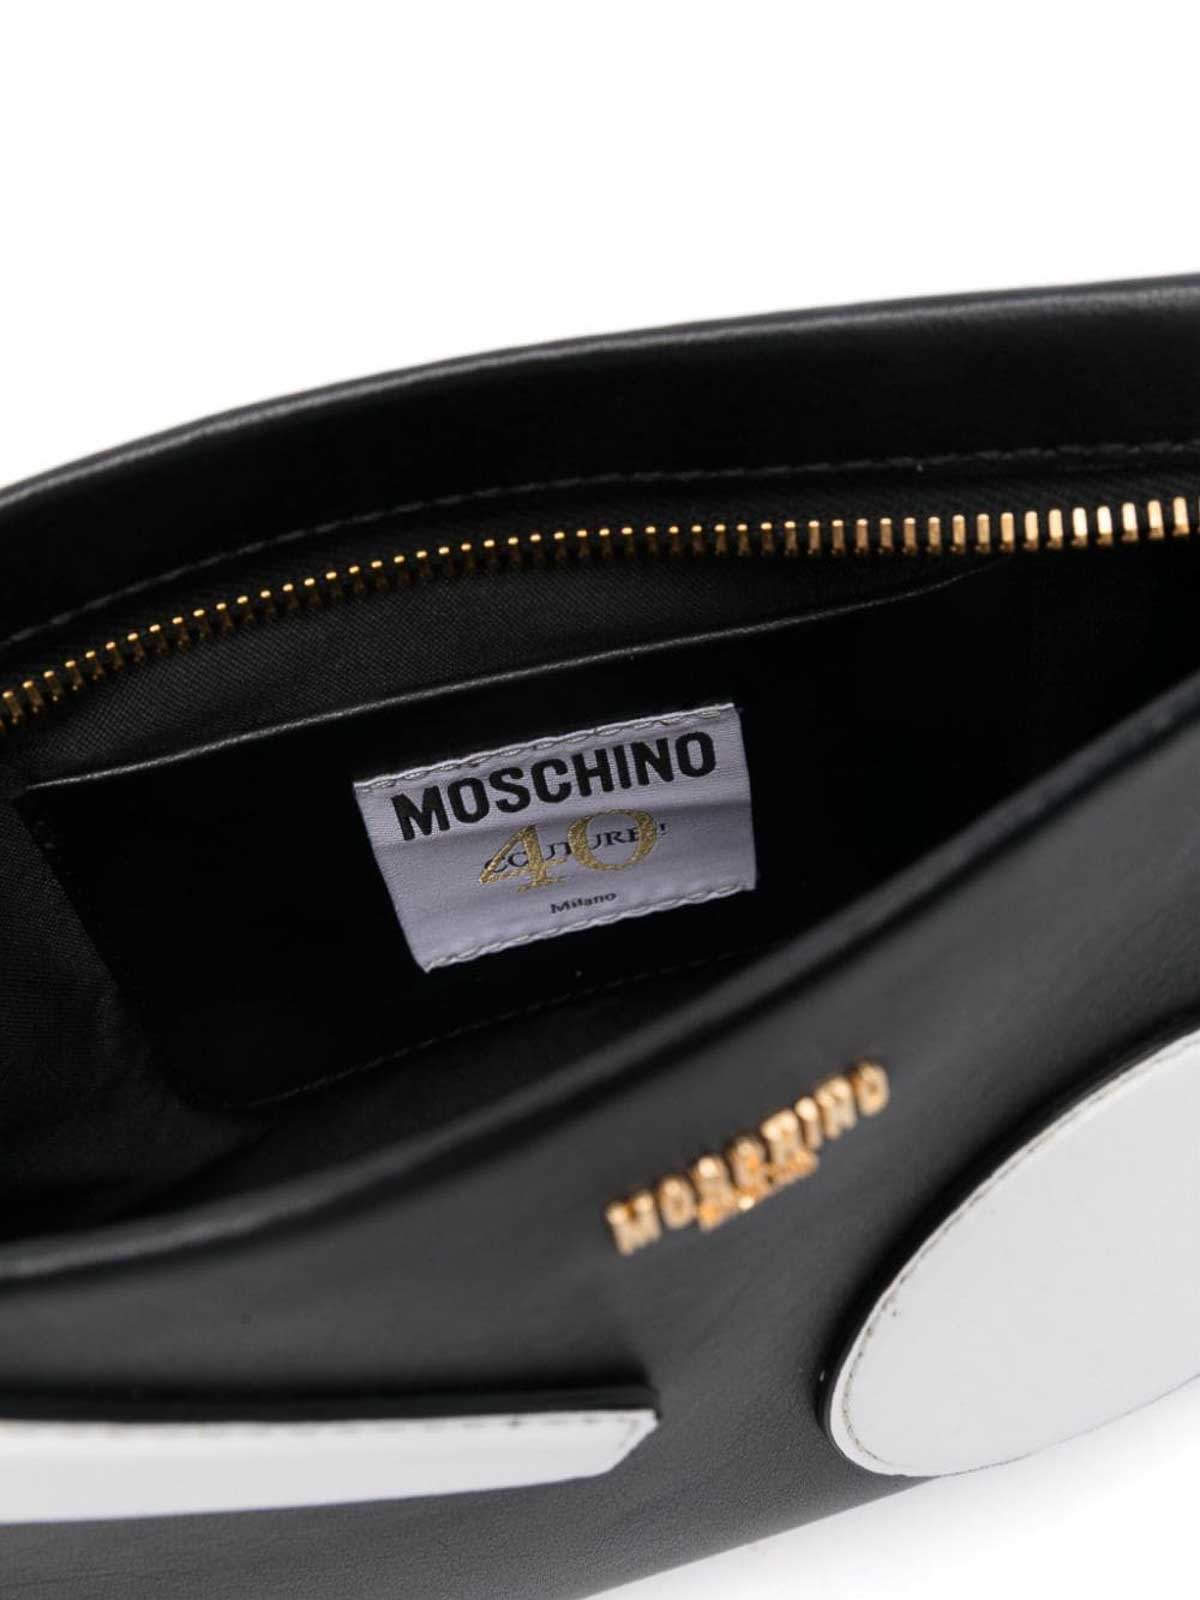 Shop Moschino Exclamation Mark Clutch Bag In Black